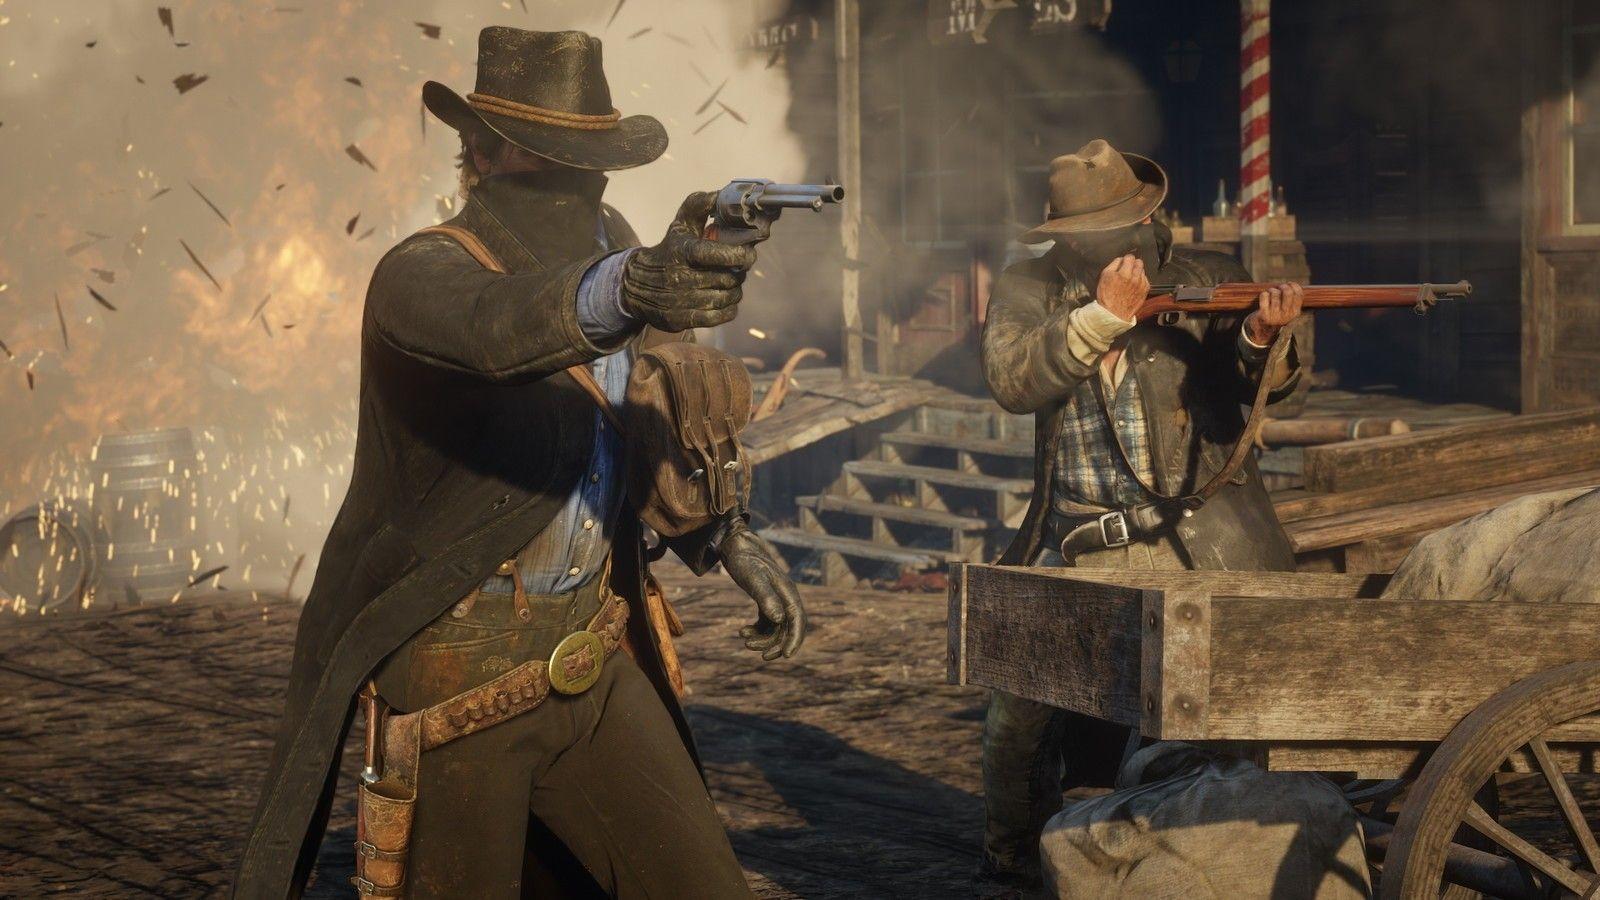 Red Dead Redemption 2 for PlayStation 4: Everything you need to know